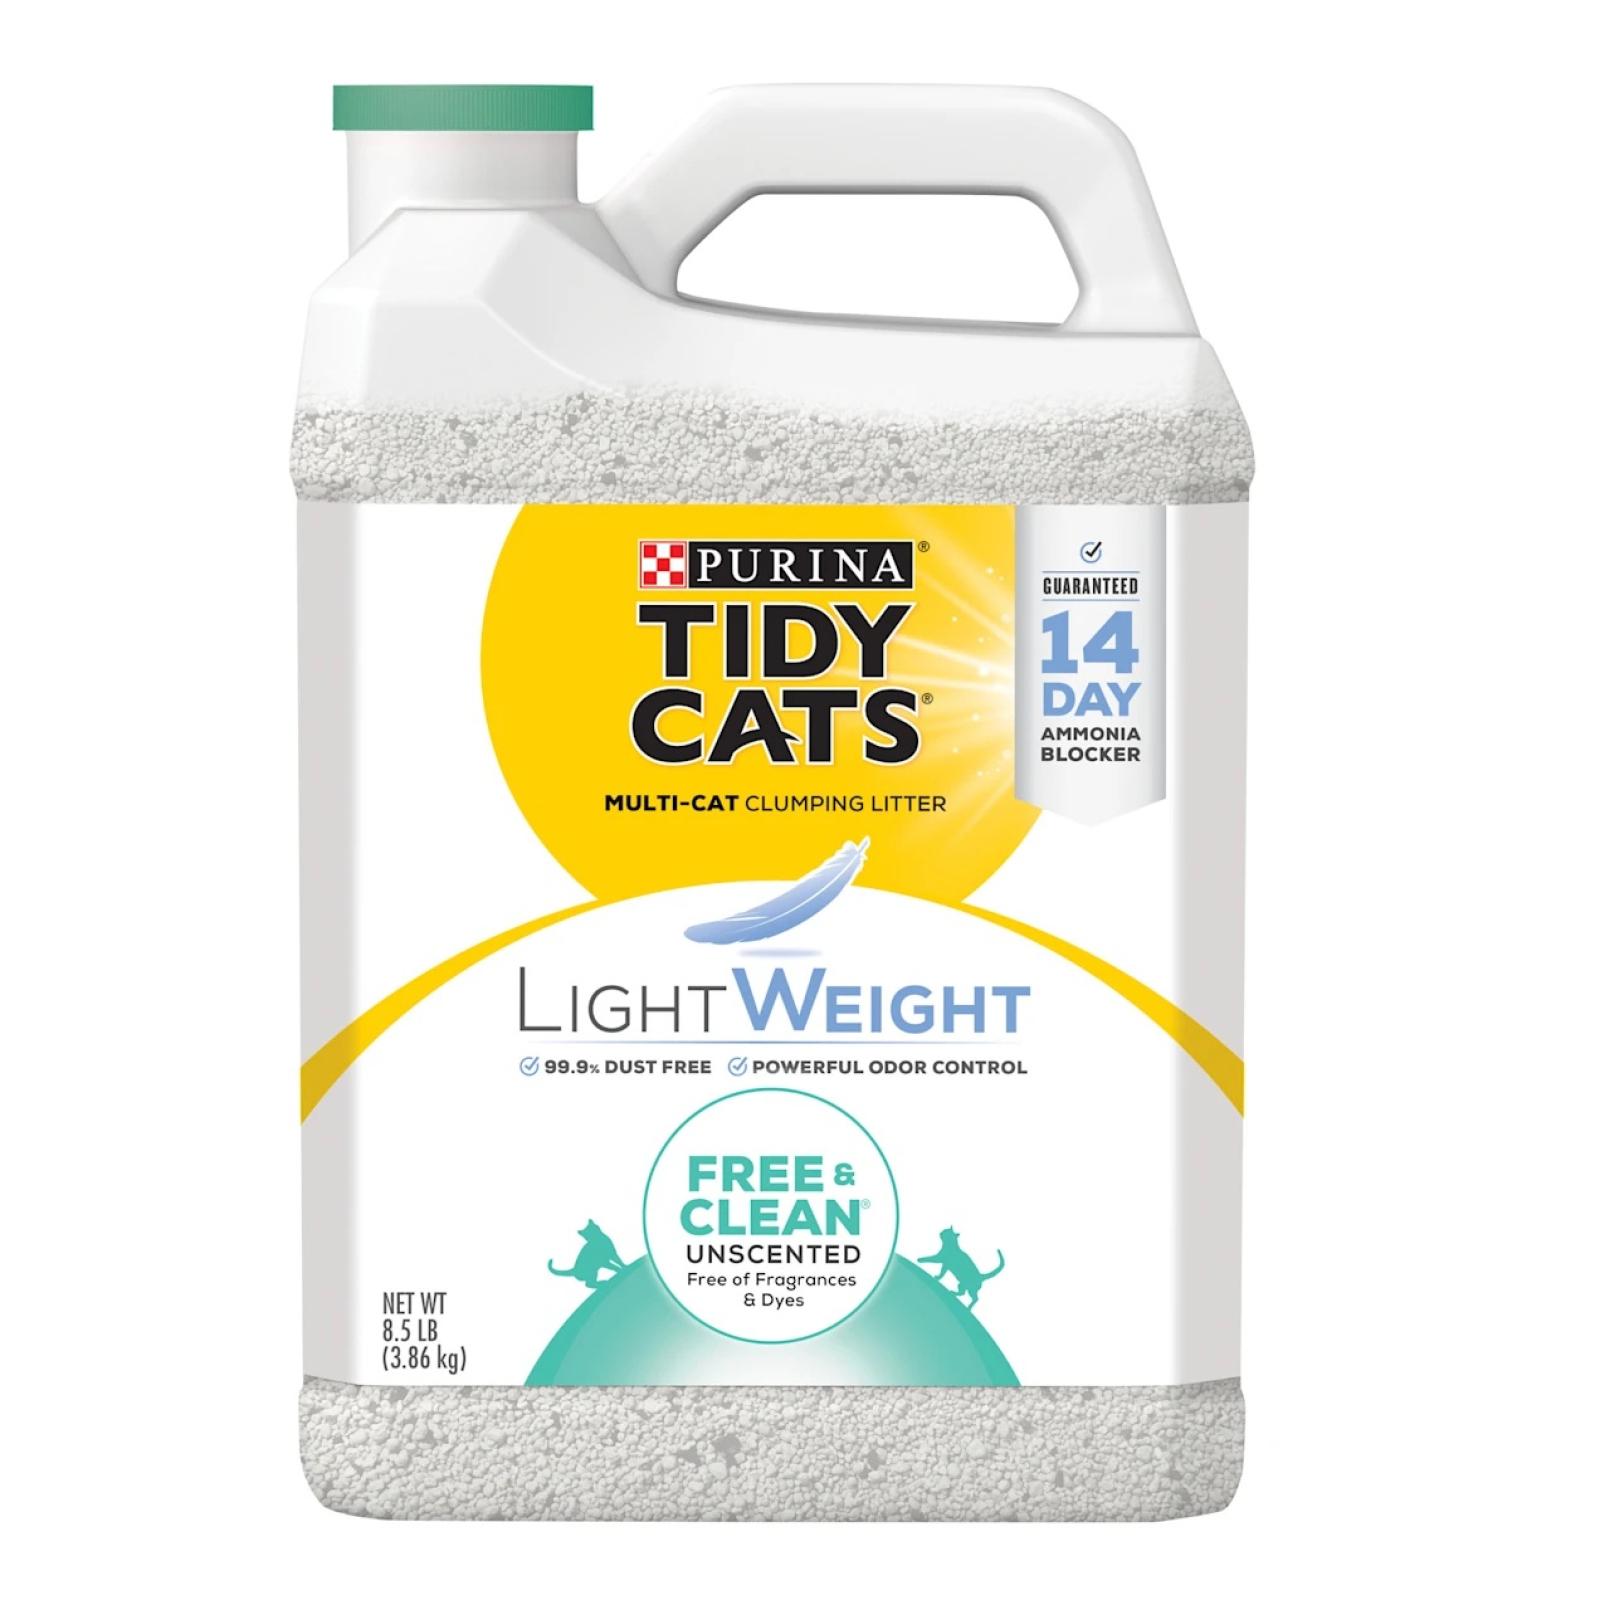 Purina Tidy Cats Lightweight Free & Clean Unscented Clumping Litter